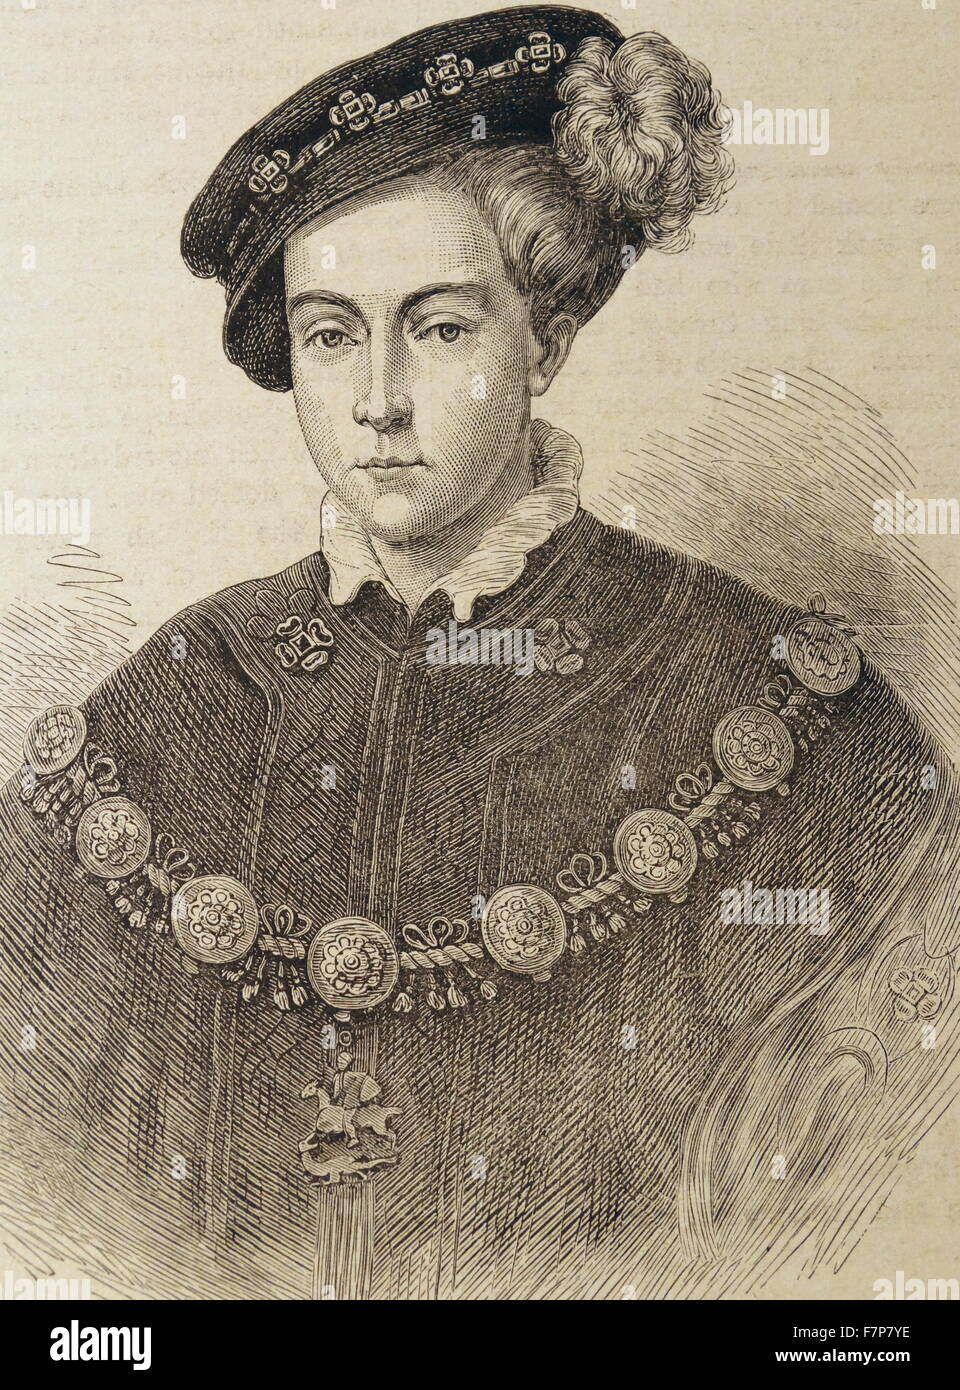 EDWARD VI - 1537-53. Son of Henry VIII and Jane Seymour. Succeeded to the throne on his father's death in 1547. Stock Photo